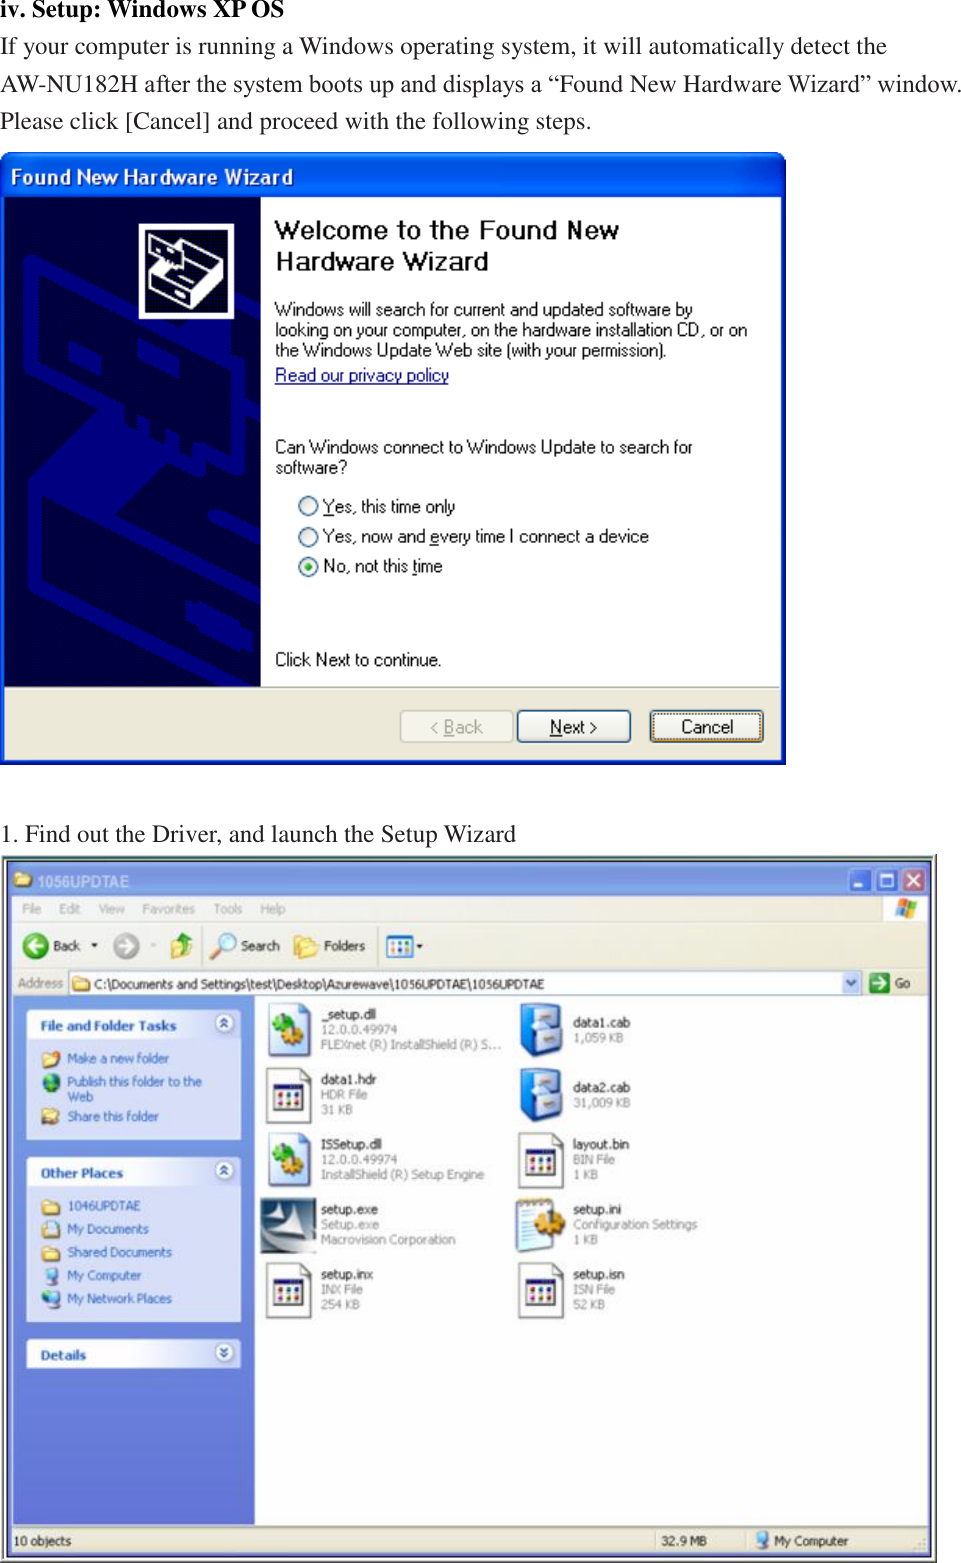 iv. Setup: Windows XP OS If your computer is running a Windows operating system, it will automatically detect the AW-NU182H after the system boots up and displays a “Found New Hardware Wizard” window. Please click [Cancel] and proceed with the following steps.   1. Find out the Driver, and launch the Setup Wizard  